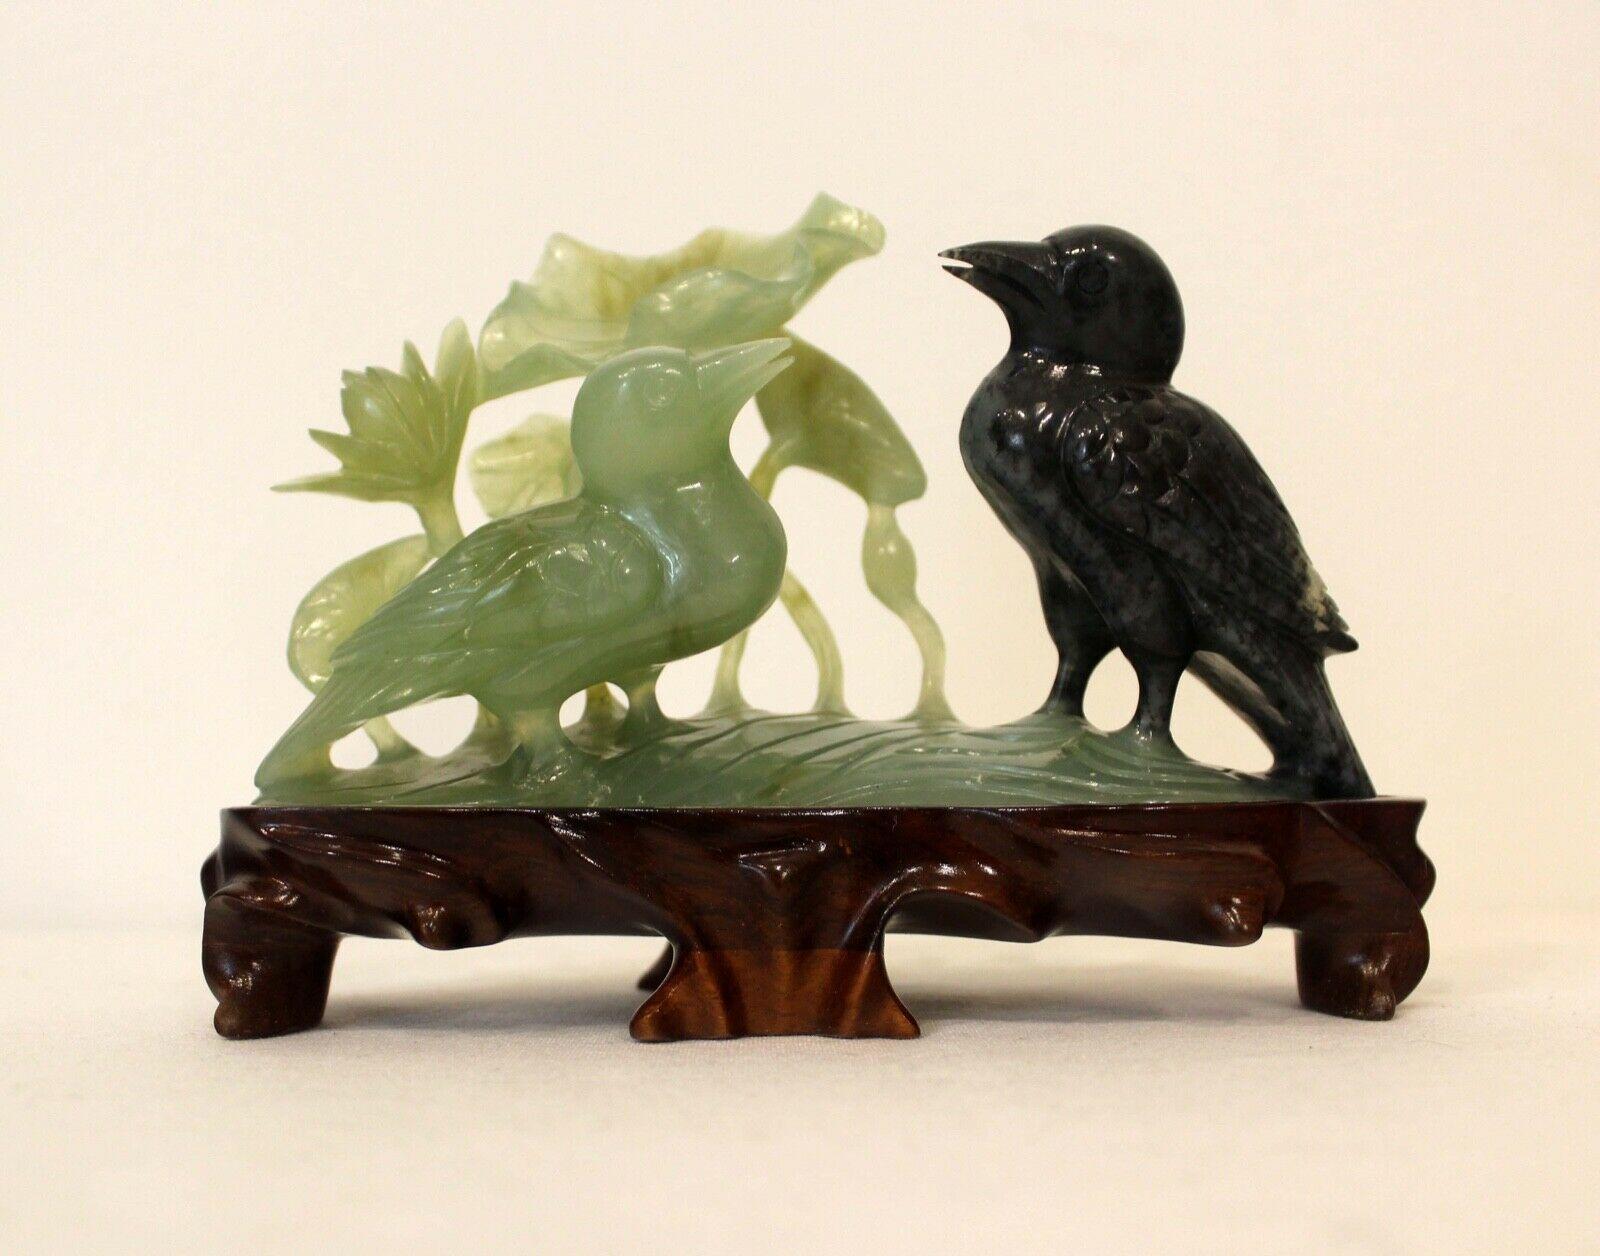 Incredibly carved Jade birds with Lotus flowers. Artisan sculpted piece to take advantage of the Dark green portion of the Jade to to give definition to the 
second bird. Includes carved attached base specific to the piece.
Dimensions: 7.5 W x 3 D